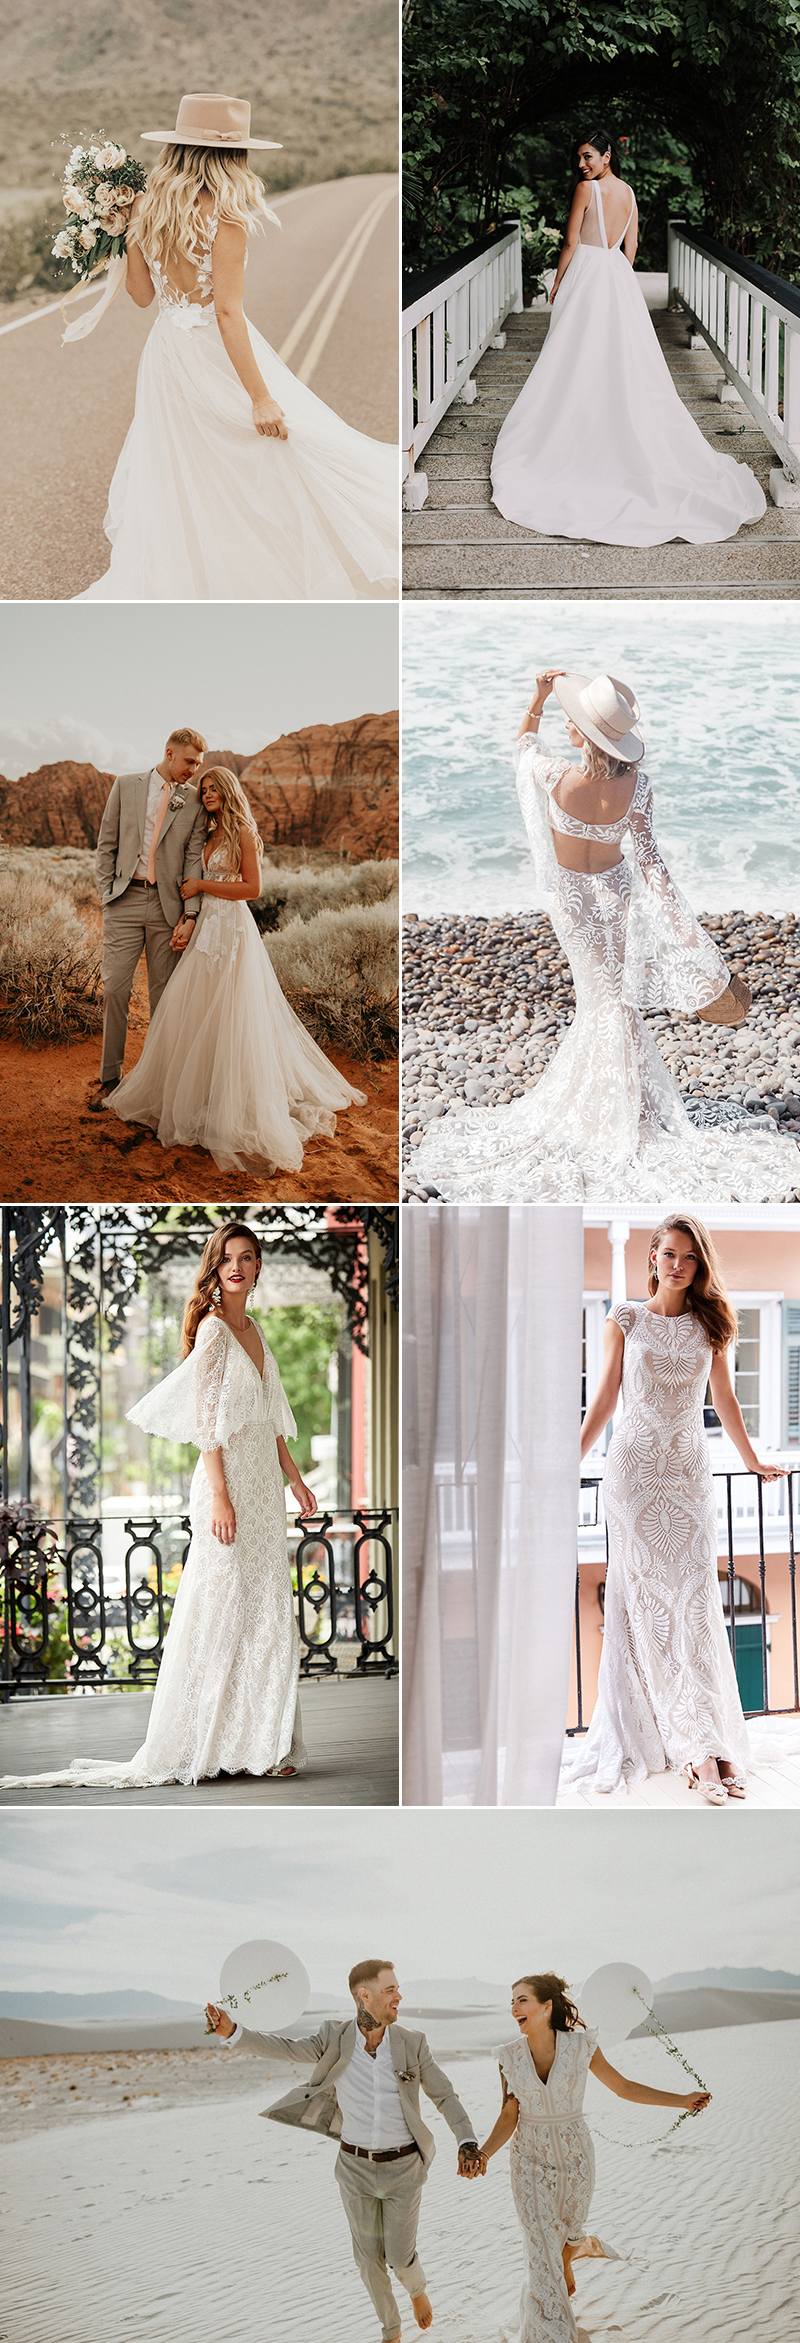 whimsical bridal gowns